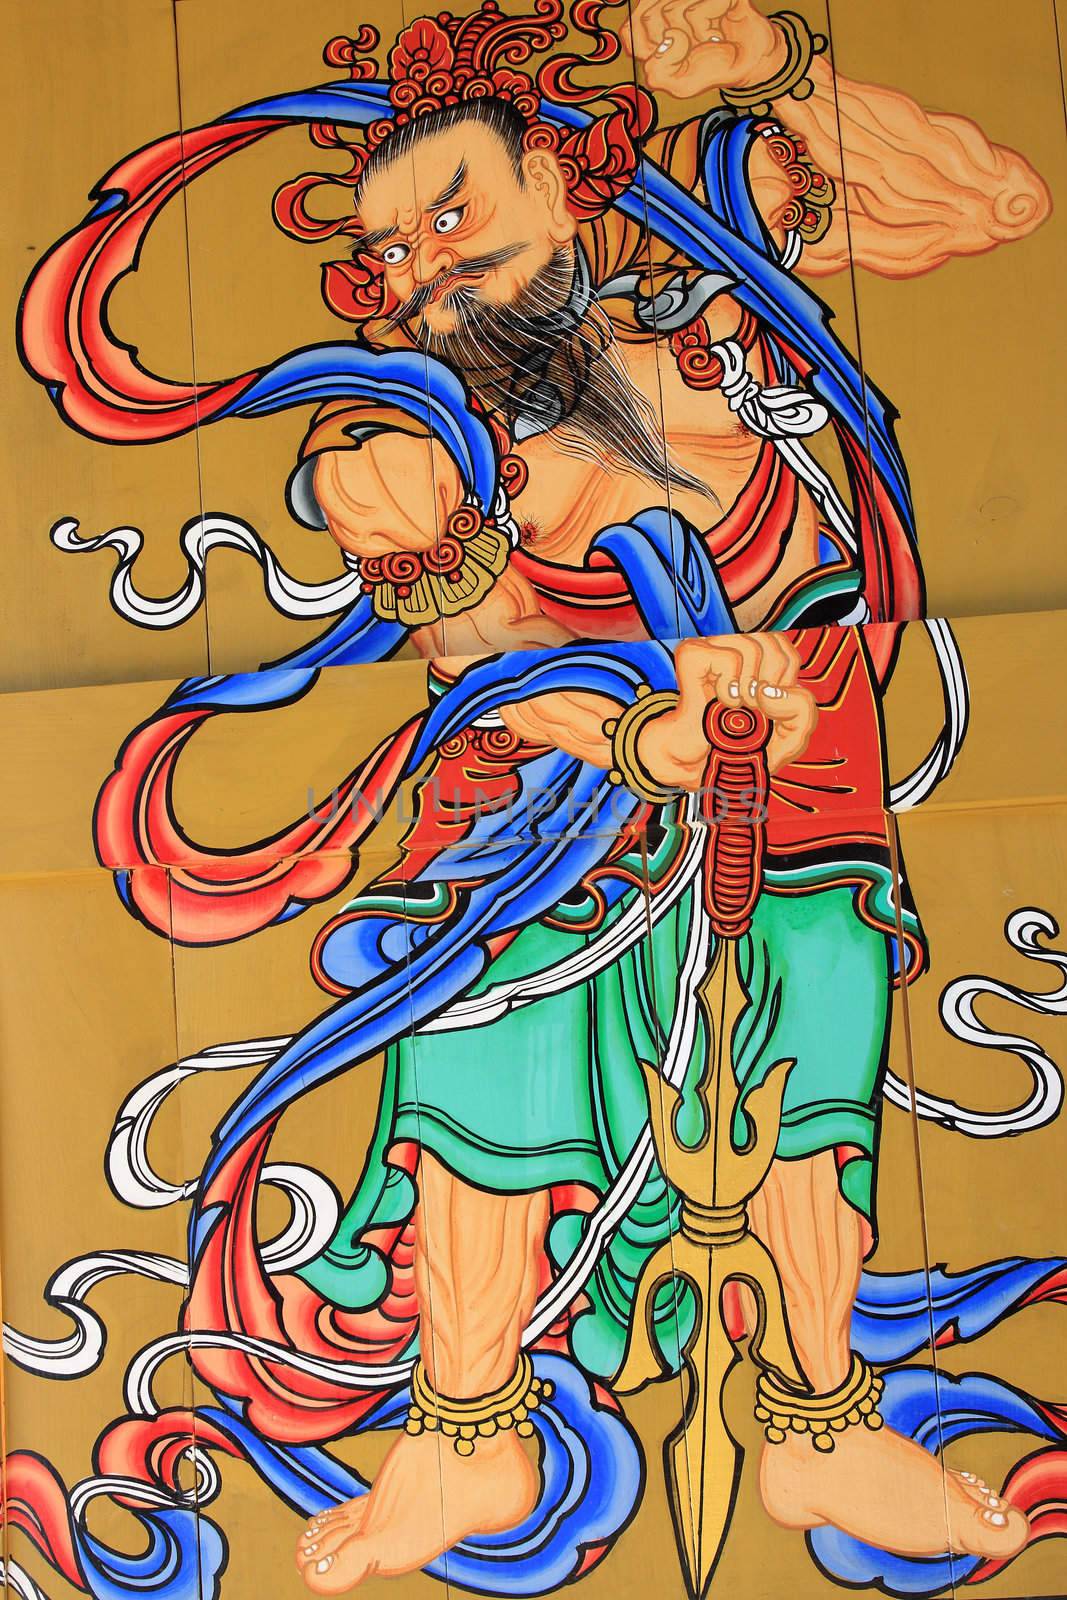 Religion painting on the wall - buddism in Seoul Korea.